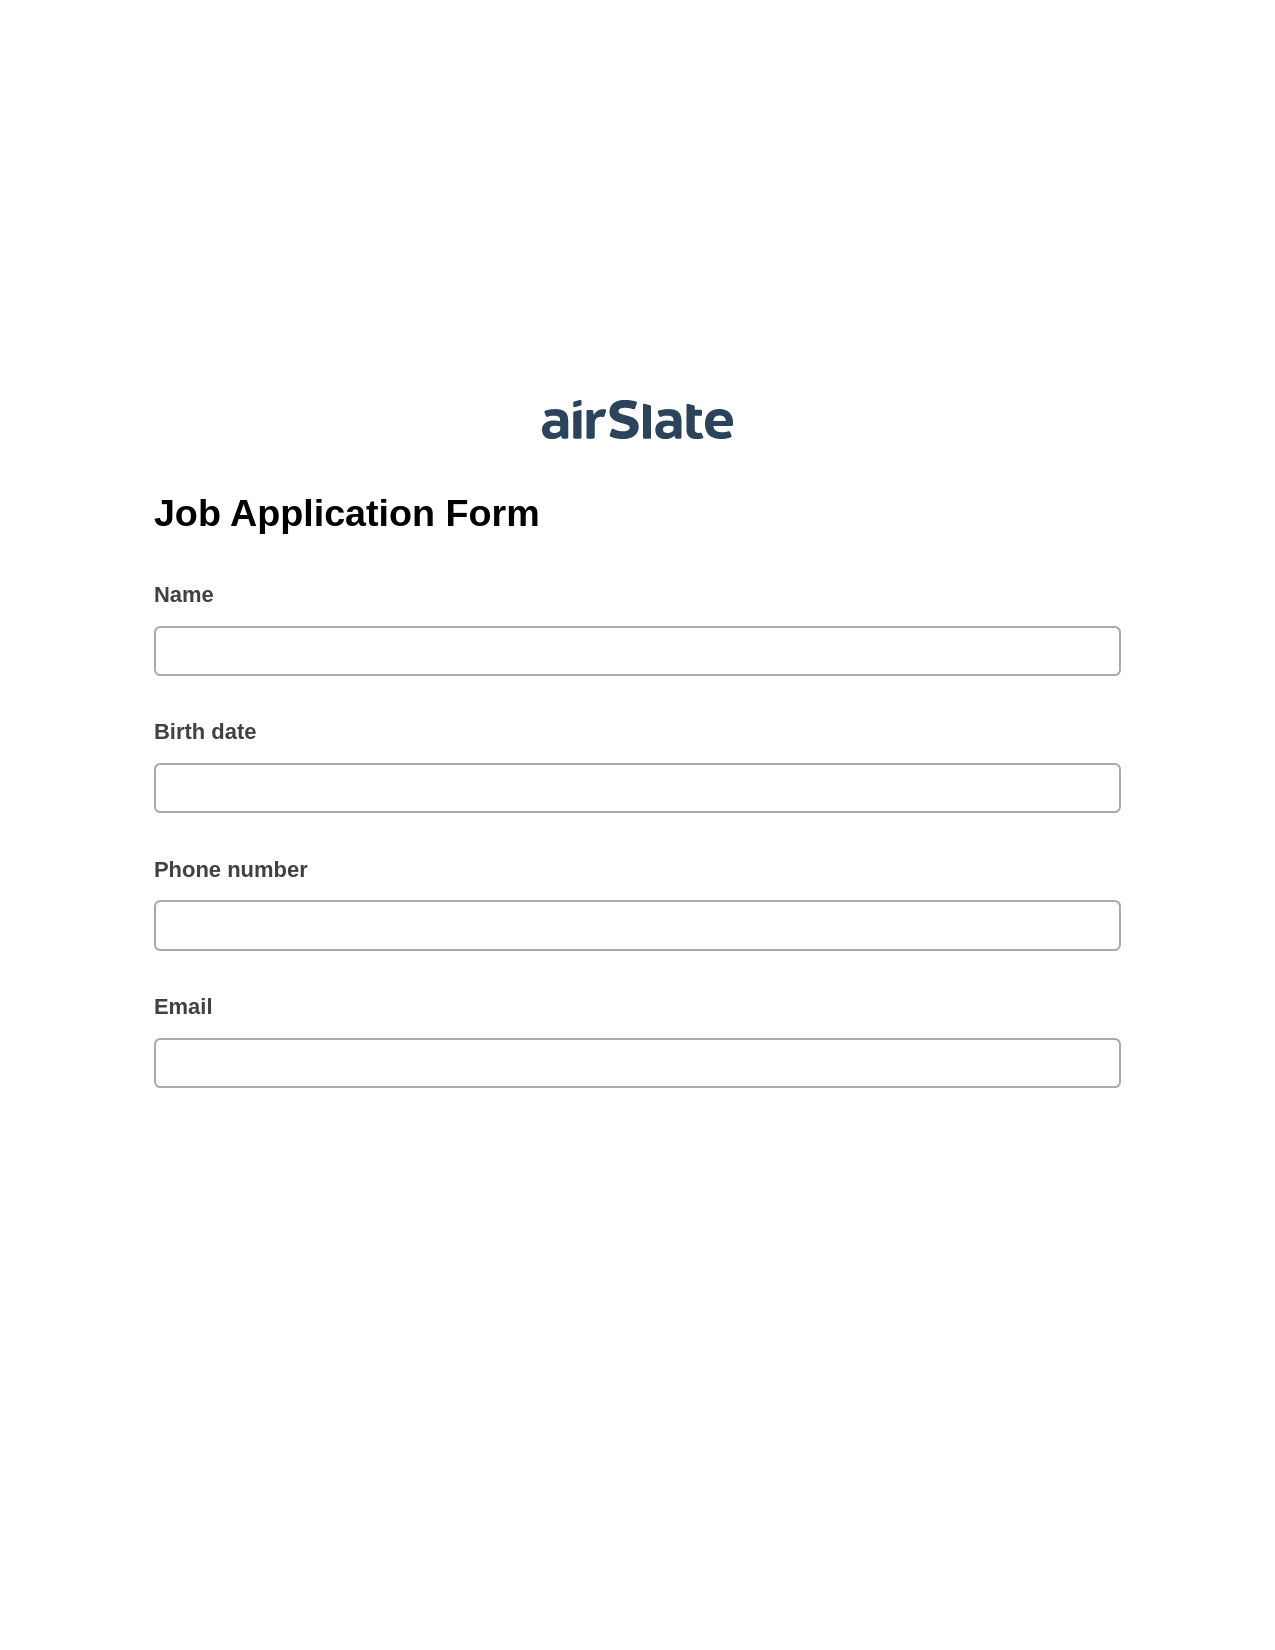 Multirole Job Application Form Pre-fill from Salesforce Records with SOQL Bot, SendGrid send Campaign bot, OneDrive Bot